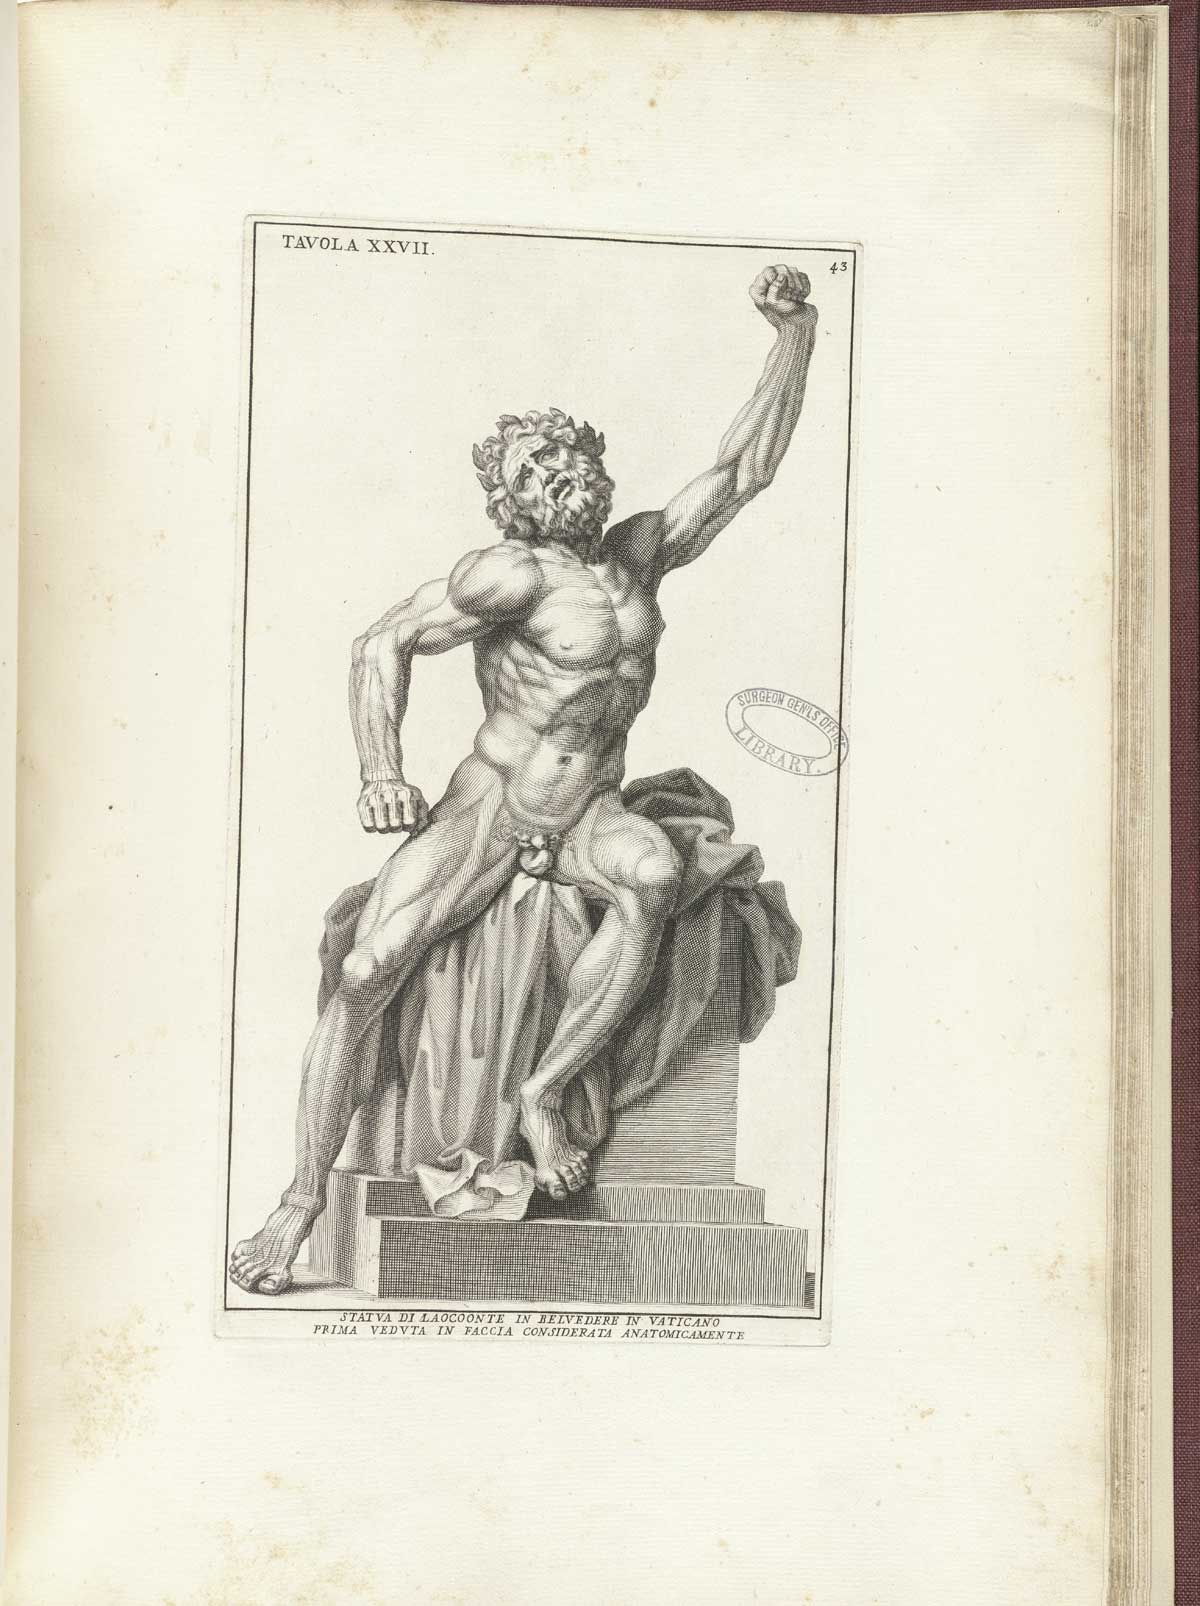 Engraving of the statue of Laocoon without his sons or the large snake which ate them; the nude facing seated figure has his left arm raised in struggle clenched in a fist as his right arm pushes down at his side, also with a clenched fist; his face faces the viewer with a look of struggle and agony.